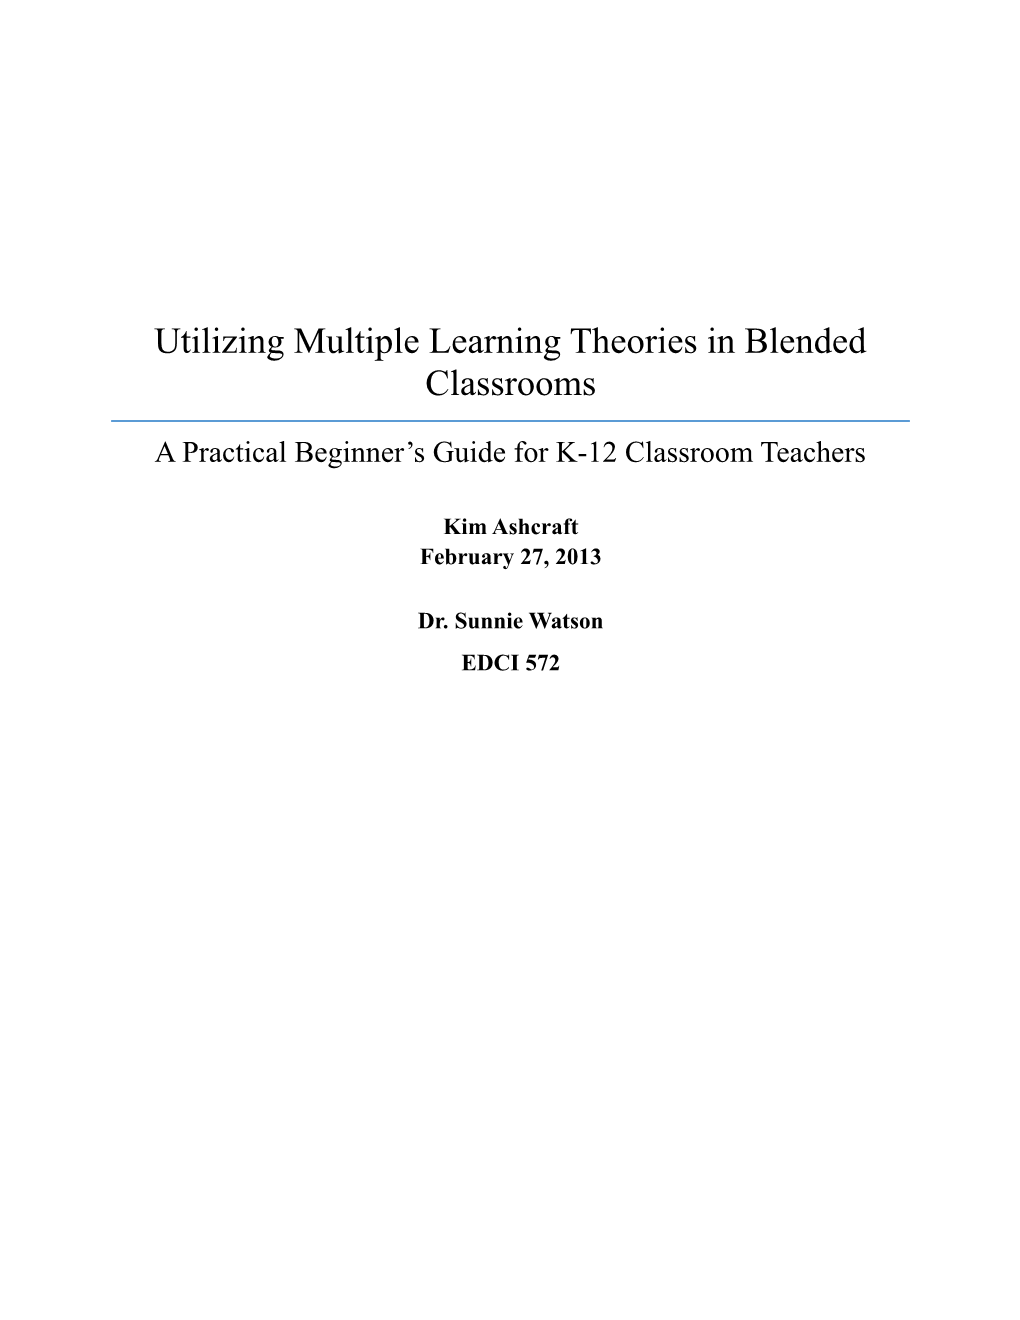 Utilizing Multiple Learning Theories in Blended Classrooms